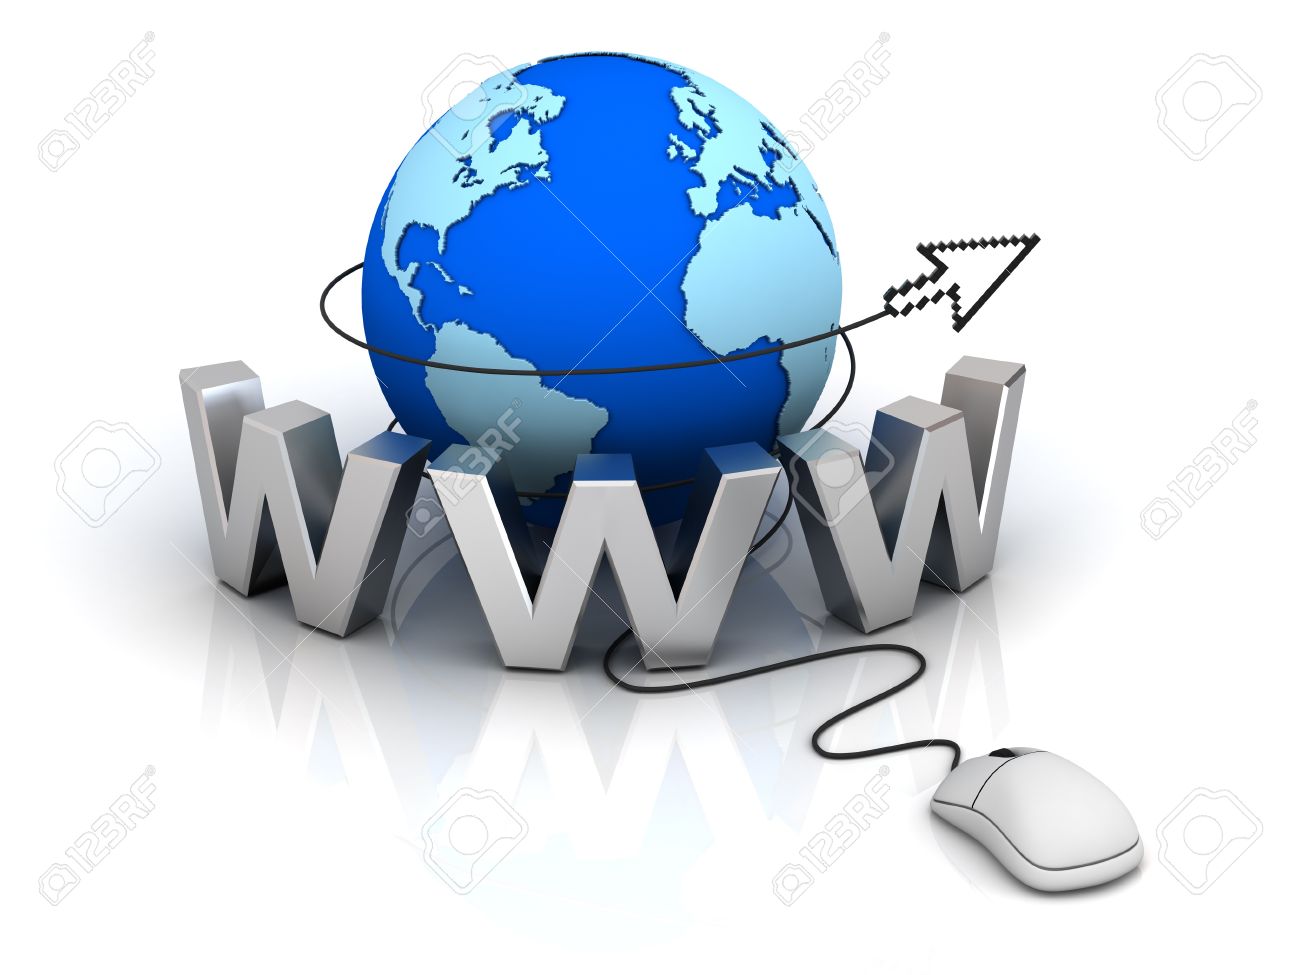 Domain, Email, Website Solutions